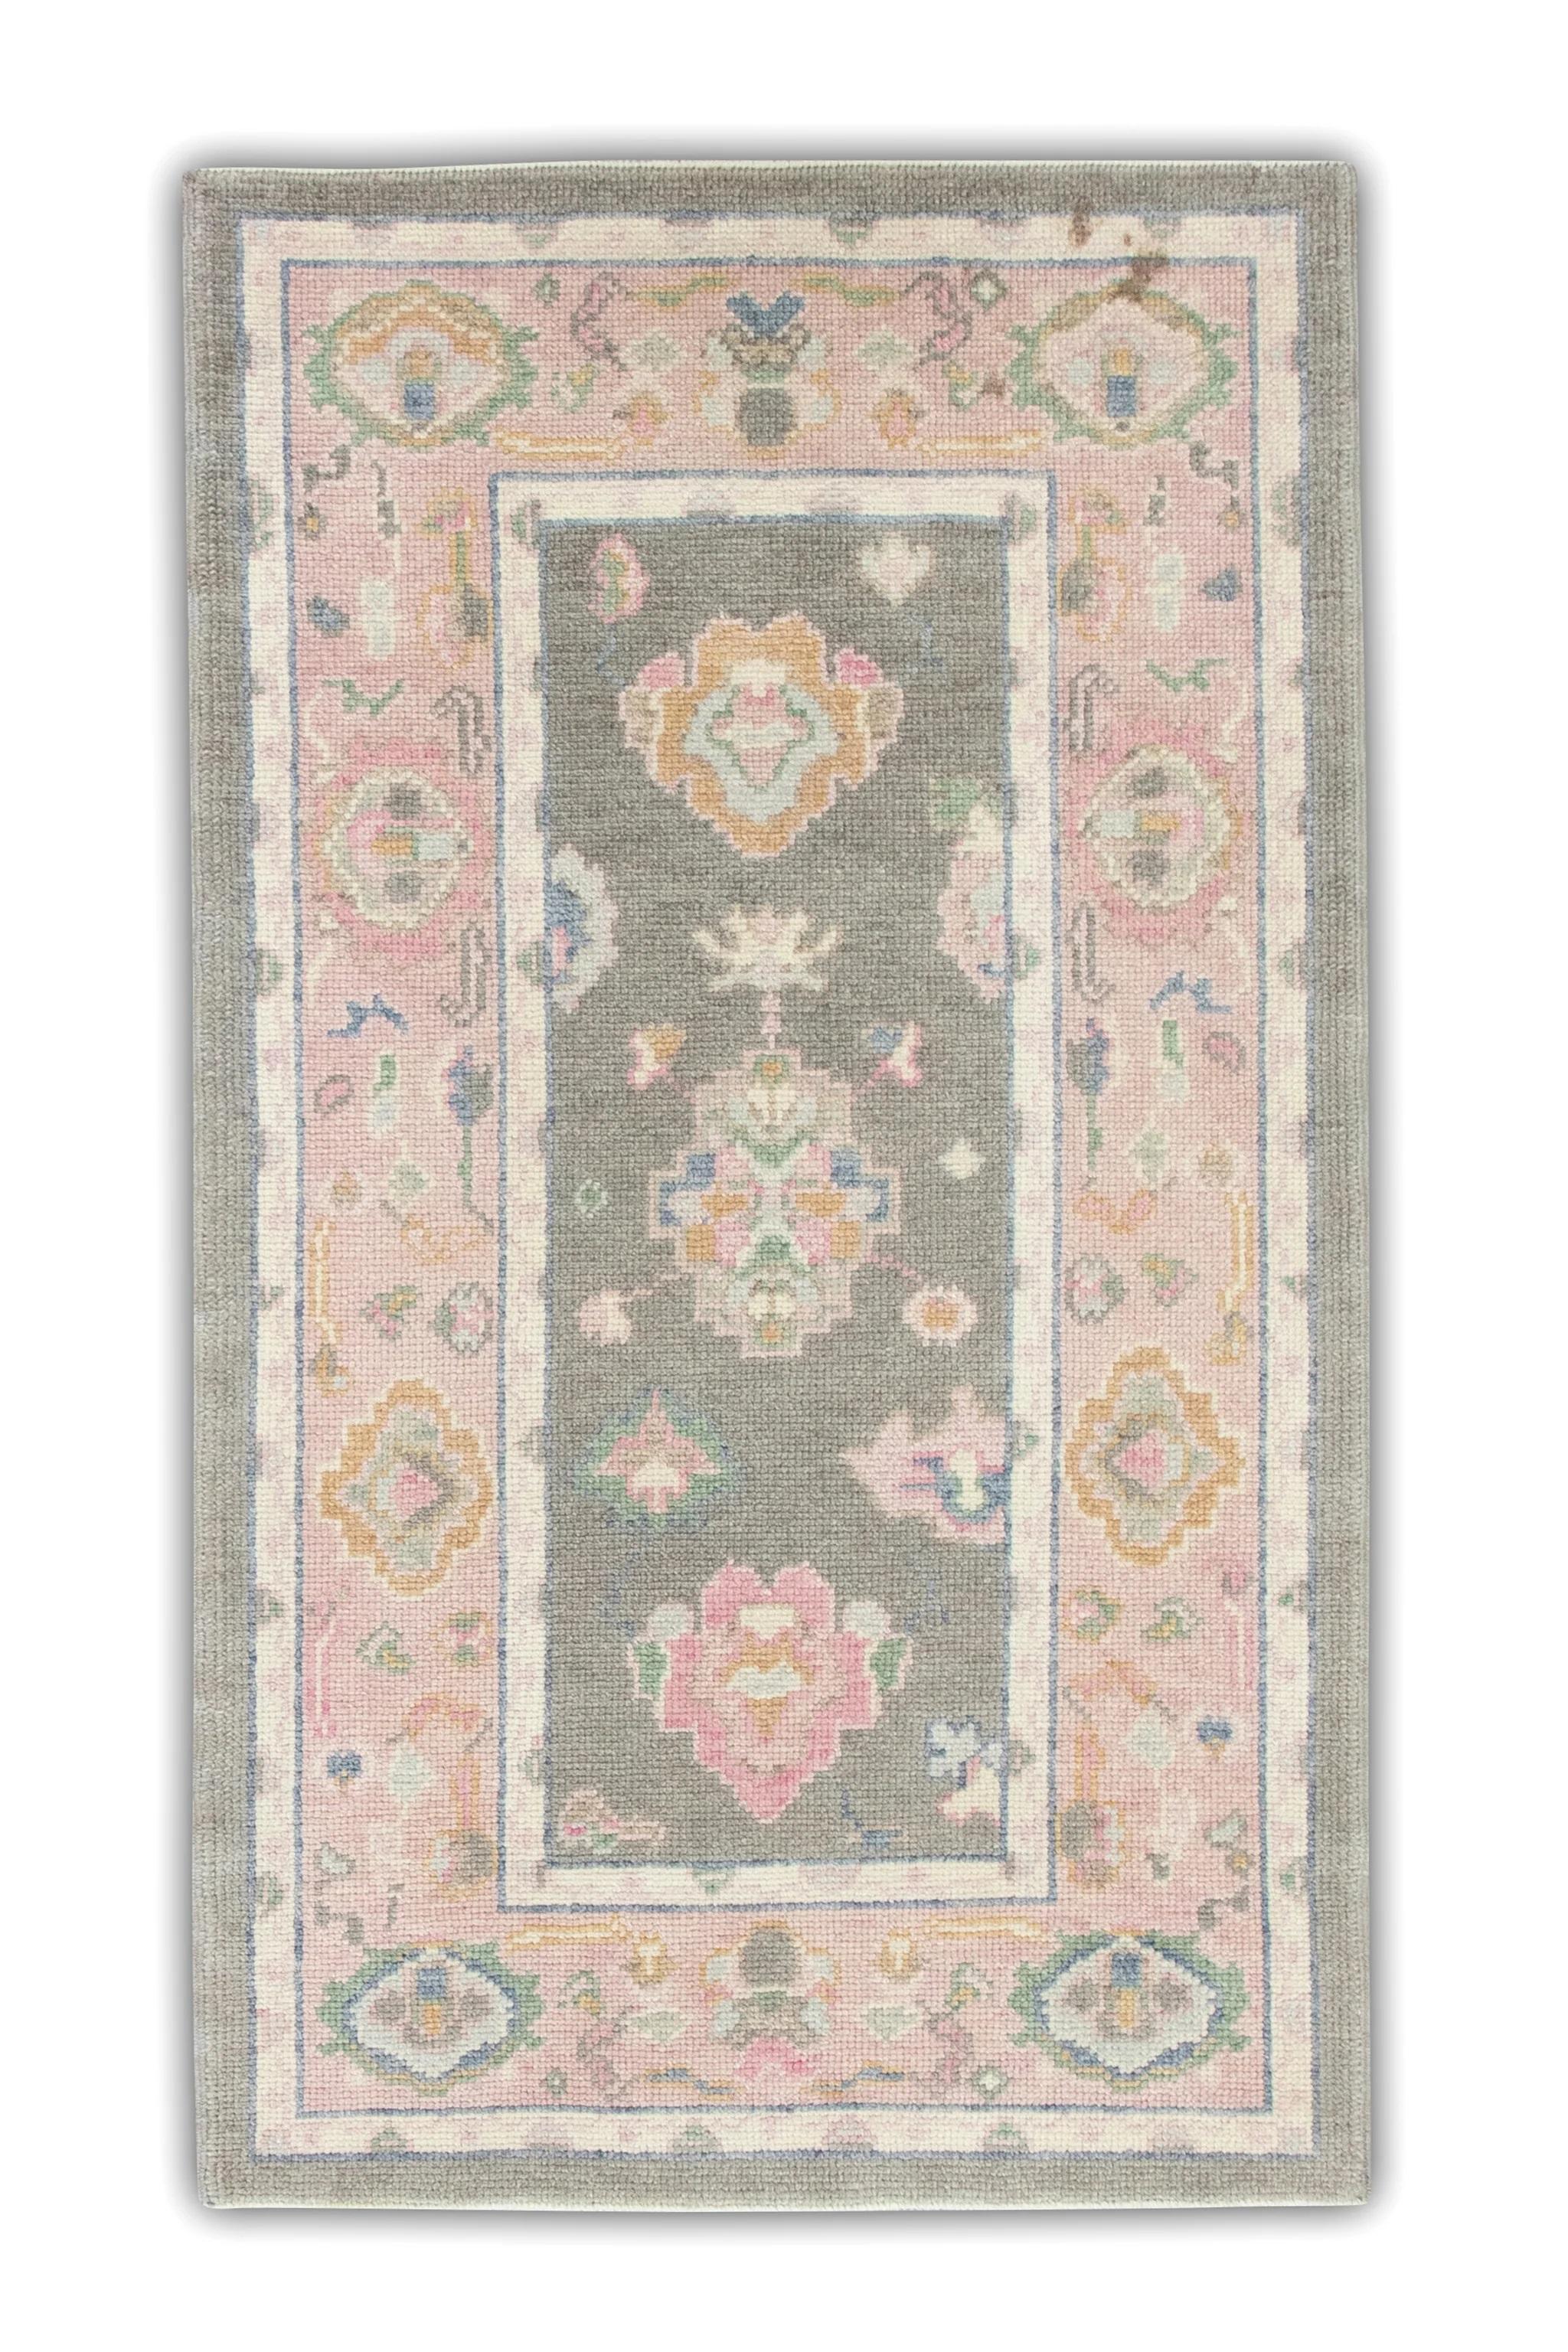 Contemporary Gray and Pink Handwoven Wool Turkish Oushak Rug in Floral Pattern 3'1